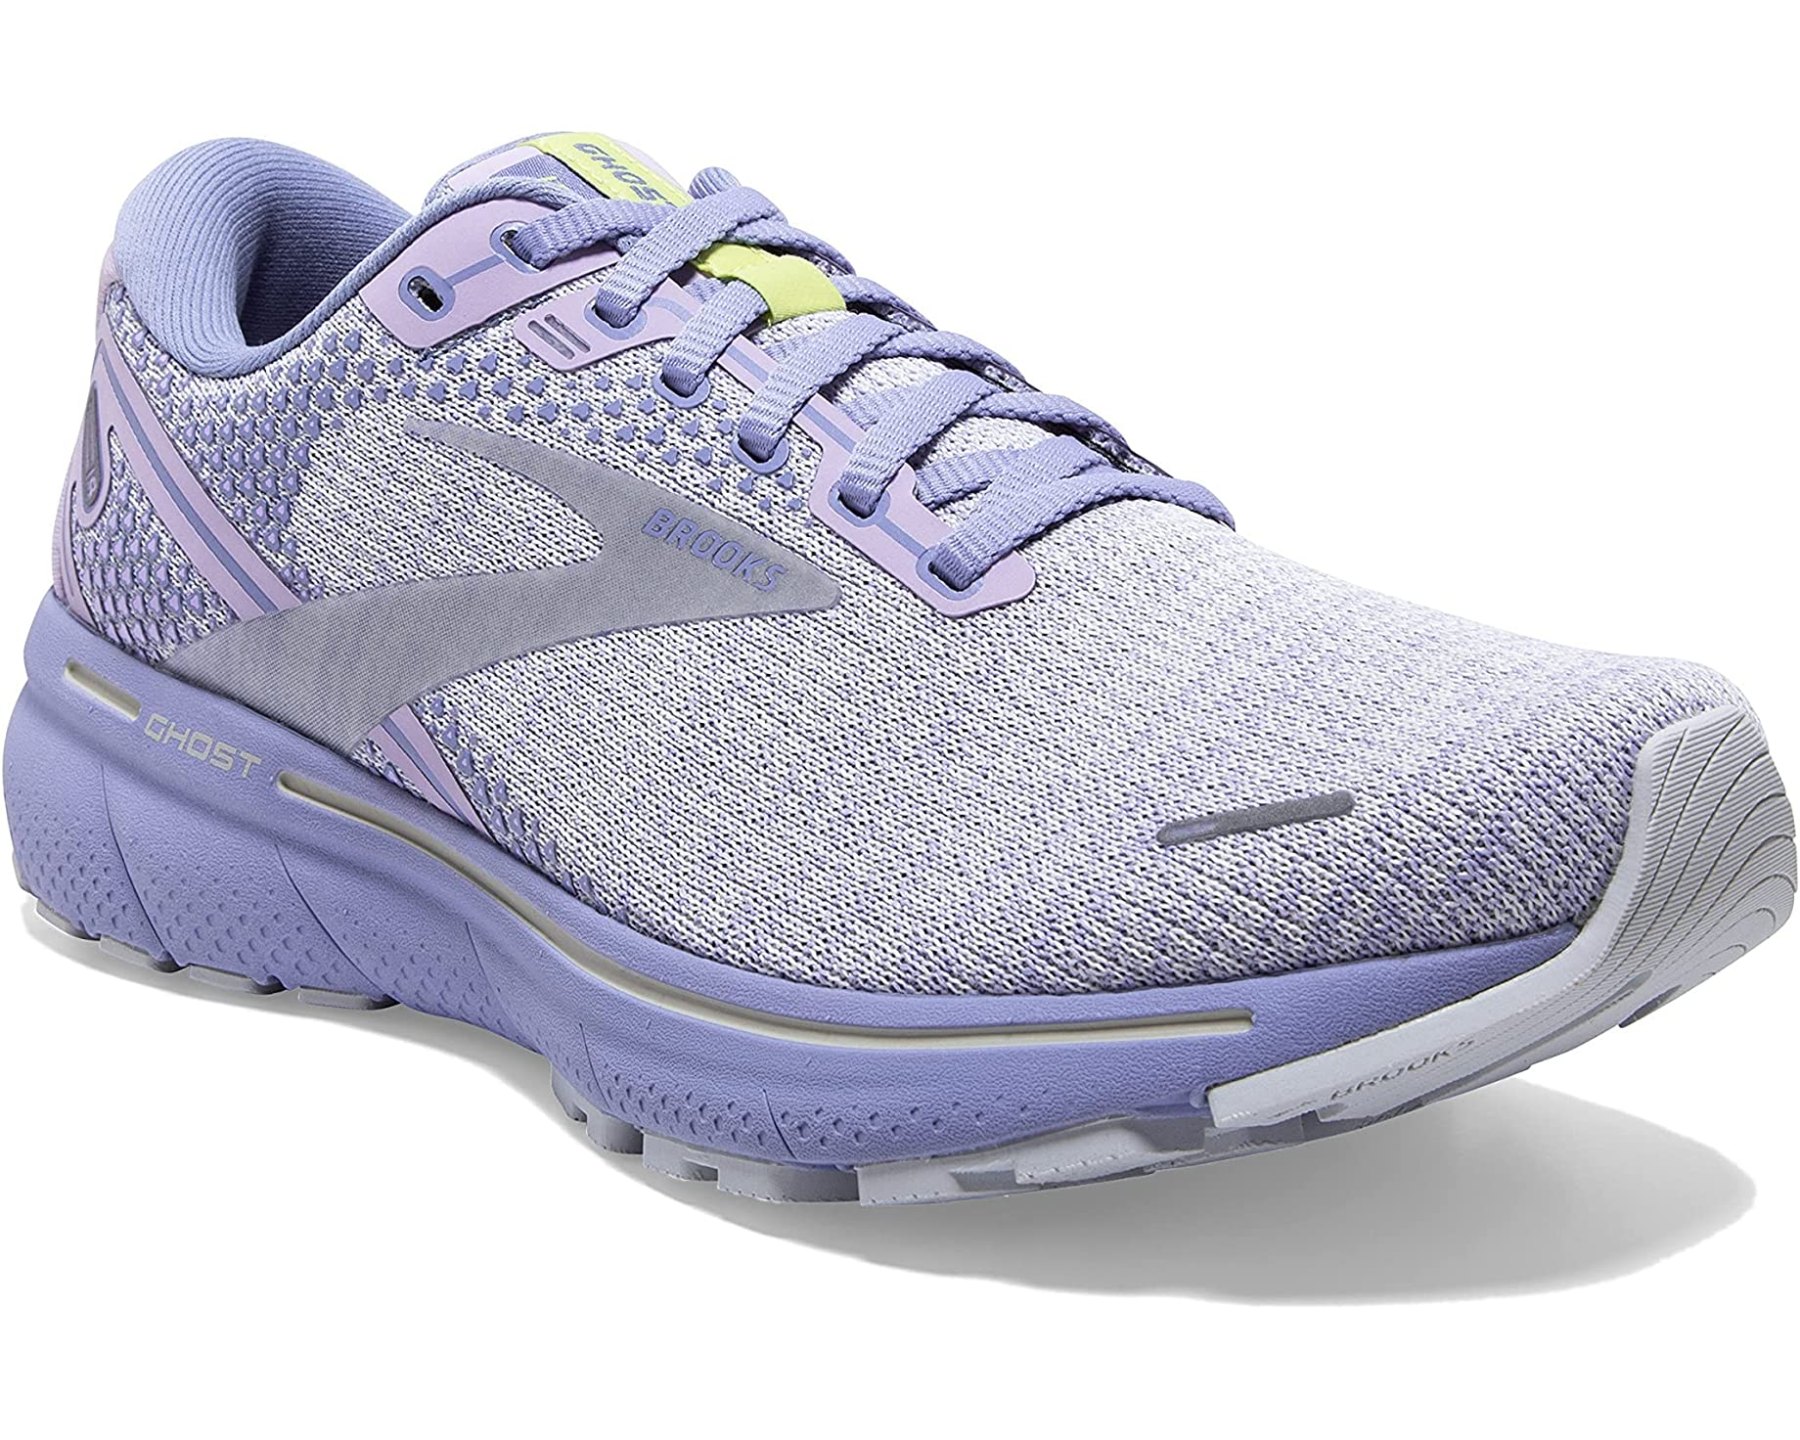 16 Best Shoes for Plantar Fasciitis to Help With Heel Pain